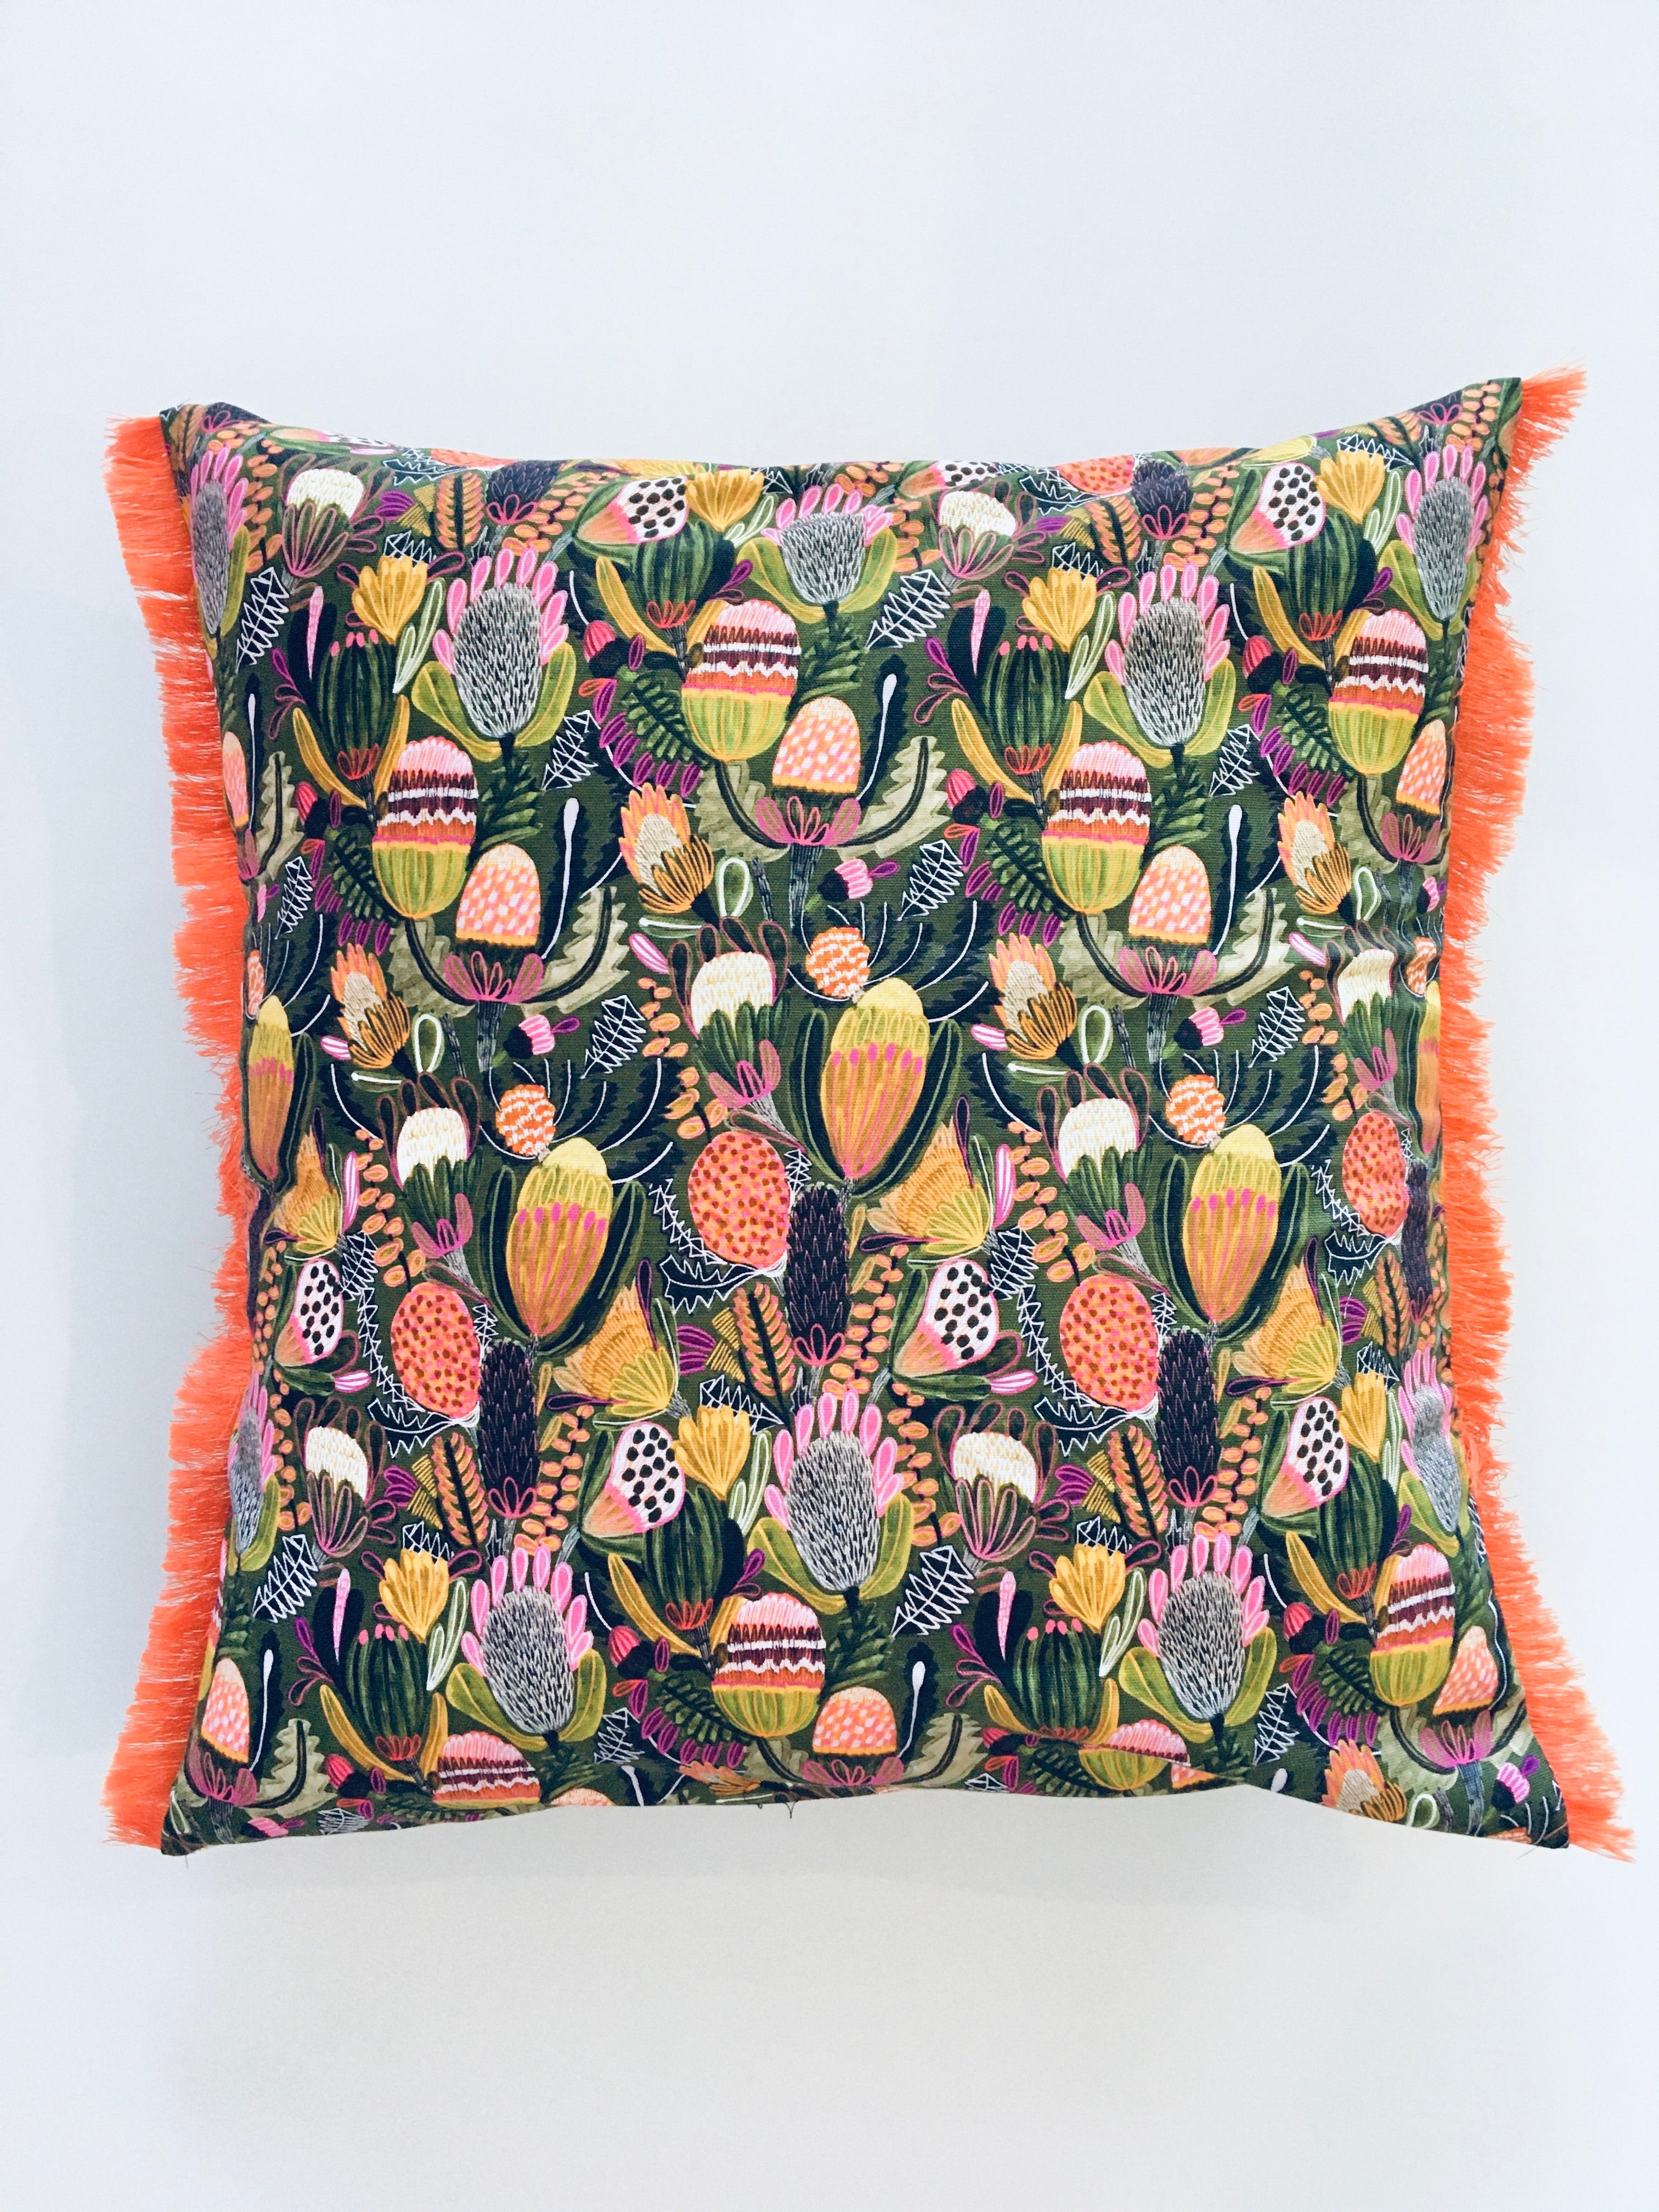 Deluxe Cushion Cover - Bush Banksia